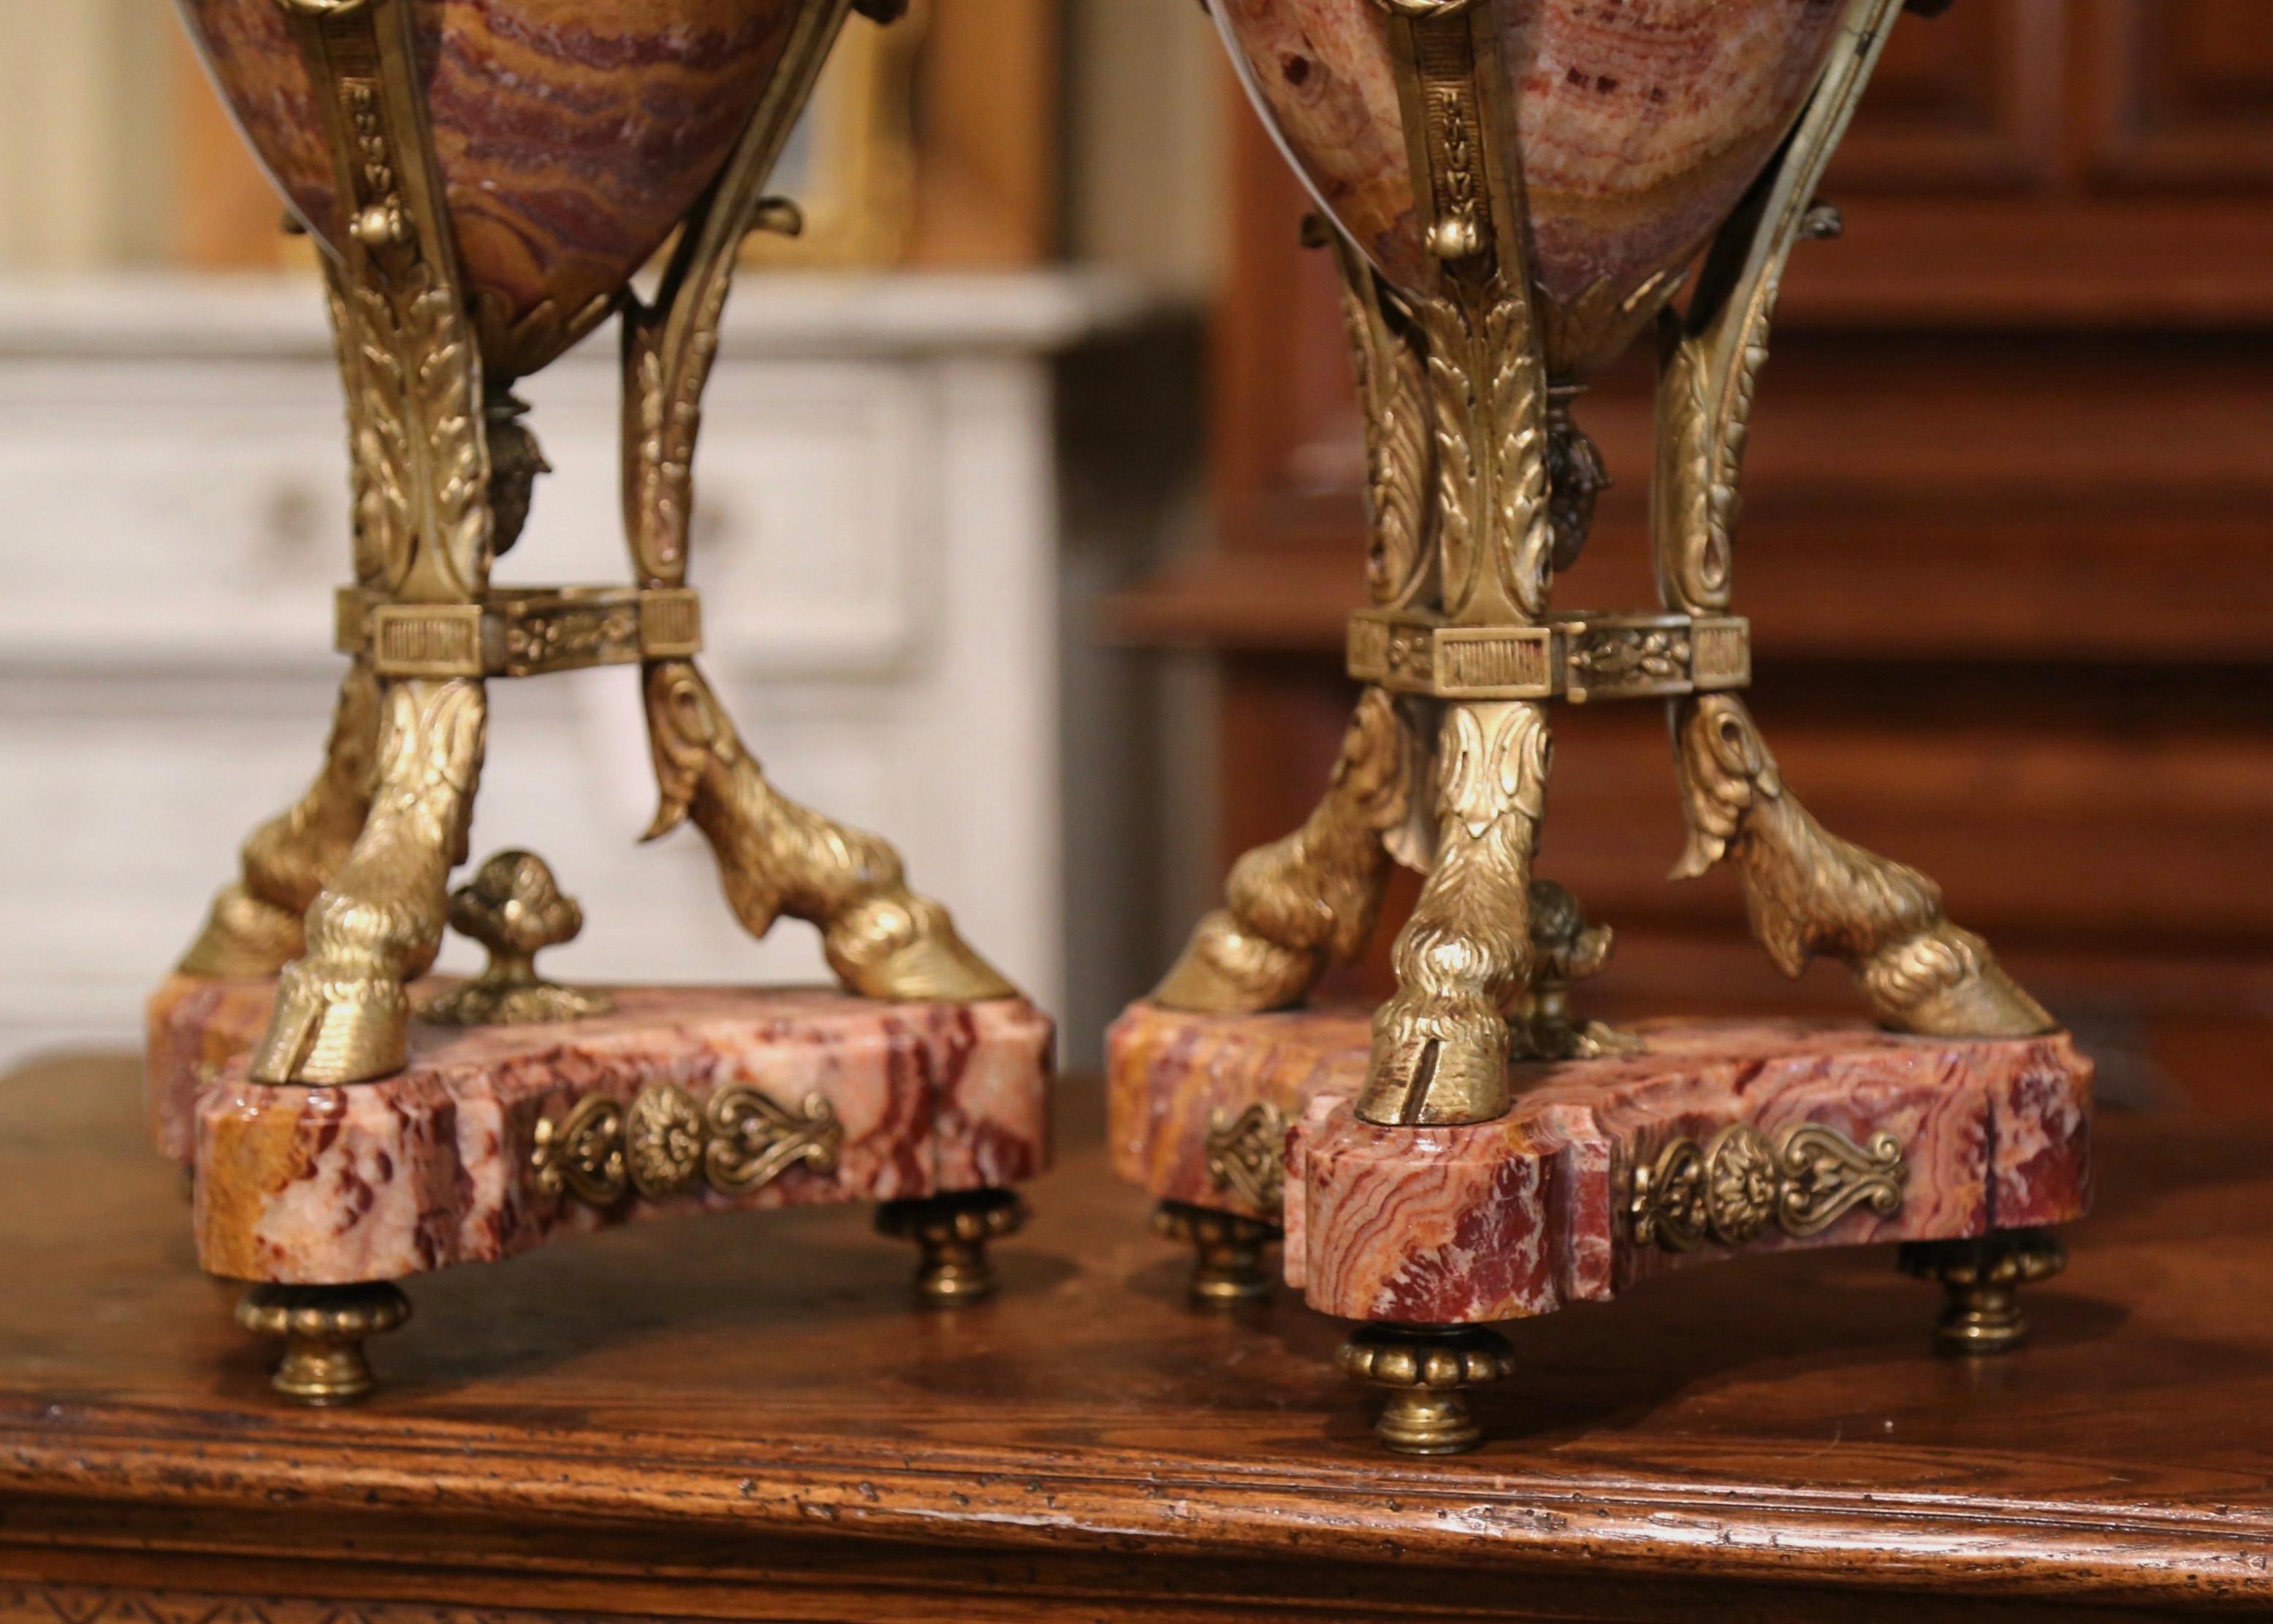 Pair of 19th Century Belgium Gilt Bronze-Mounted Variegated Onyx Covered Urns 2